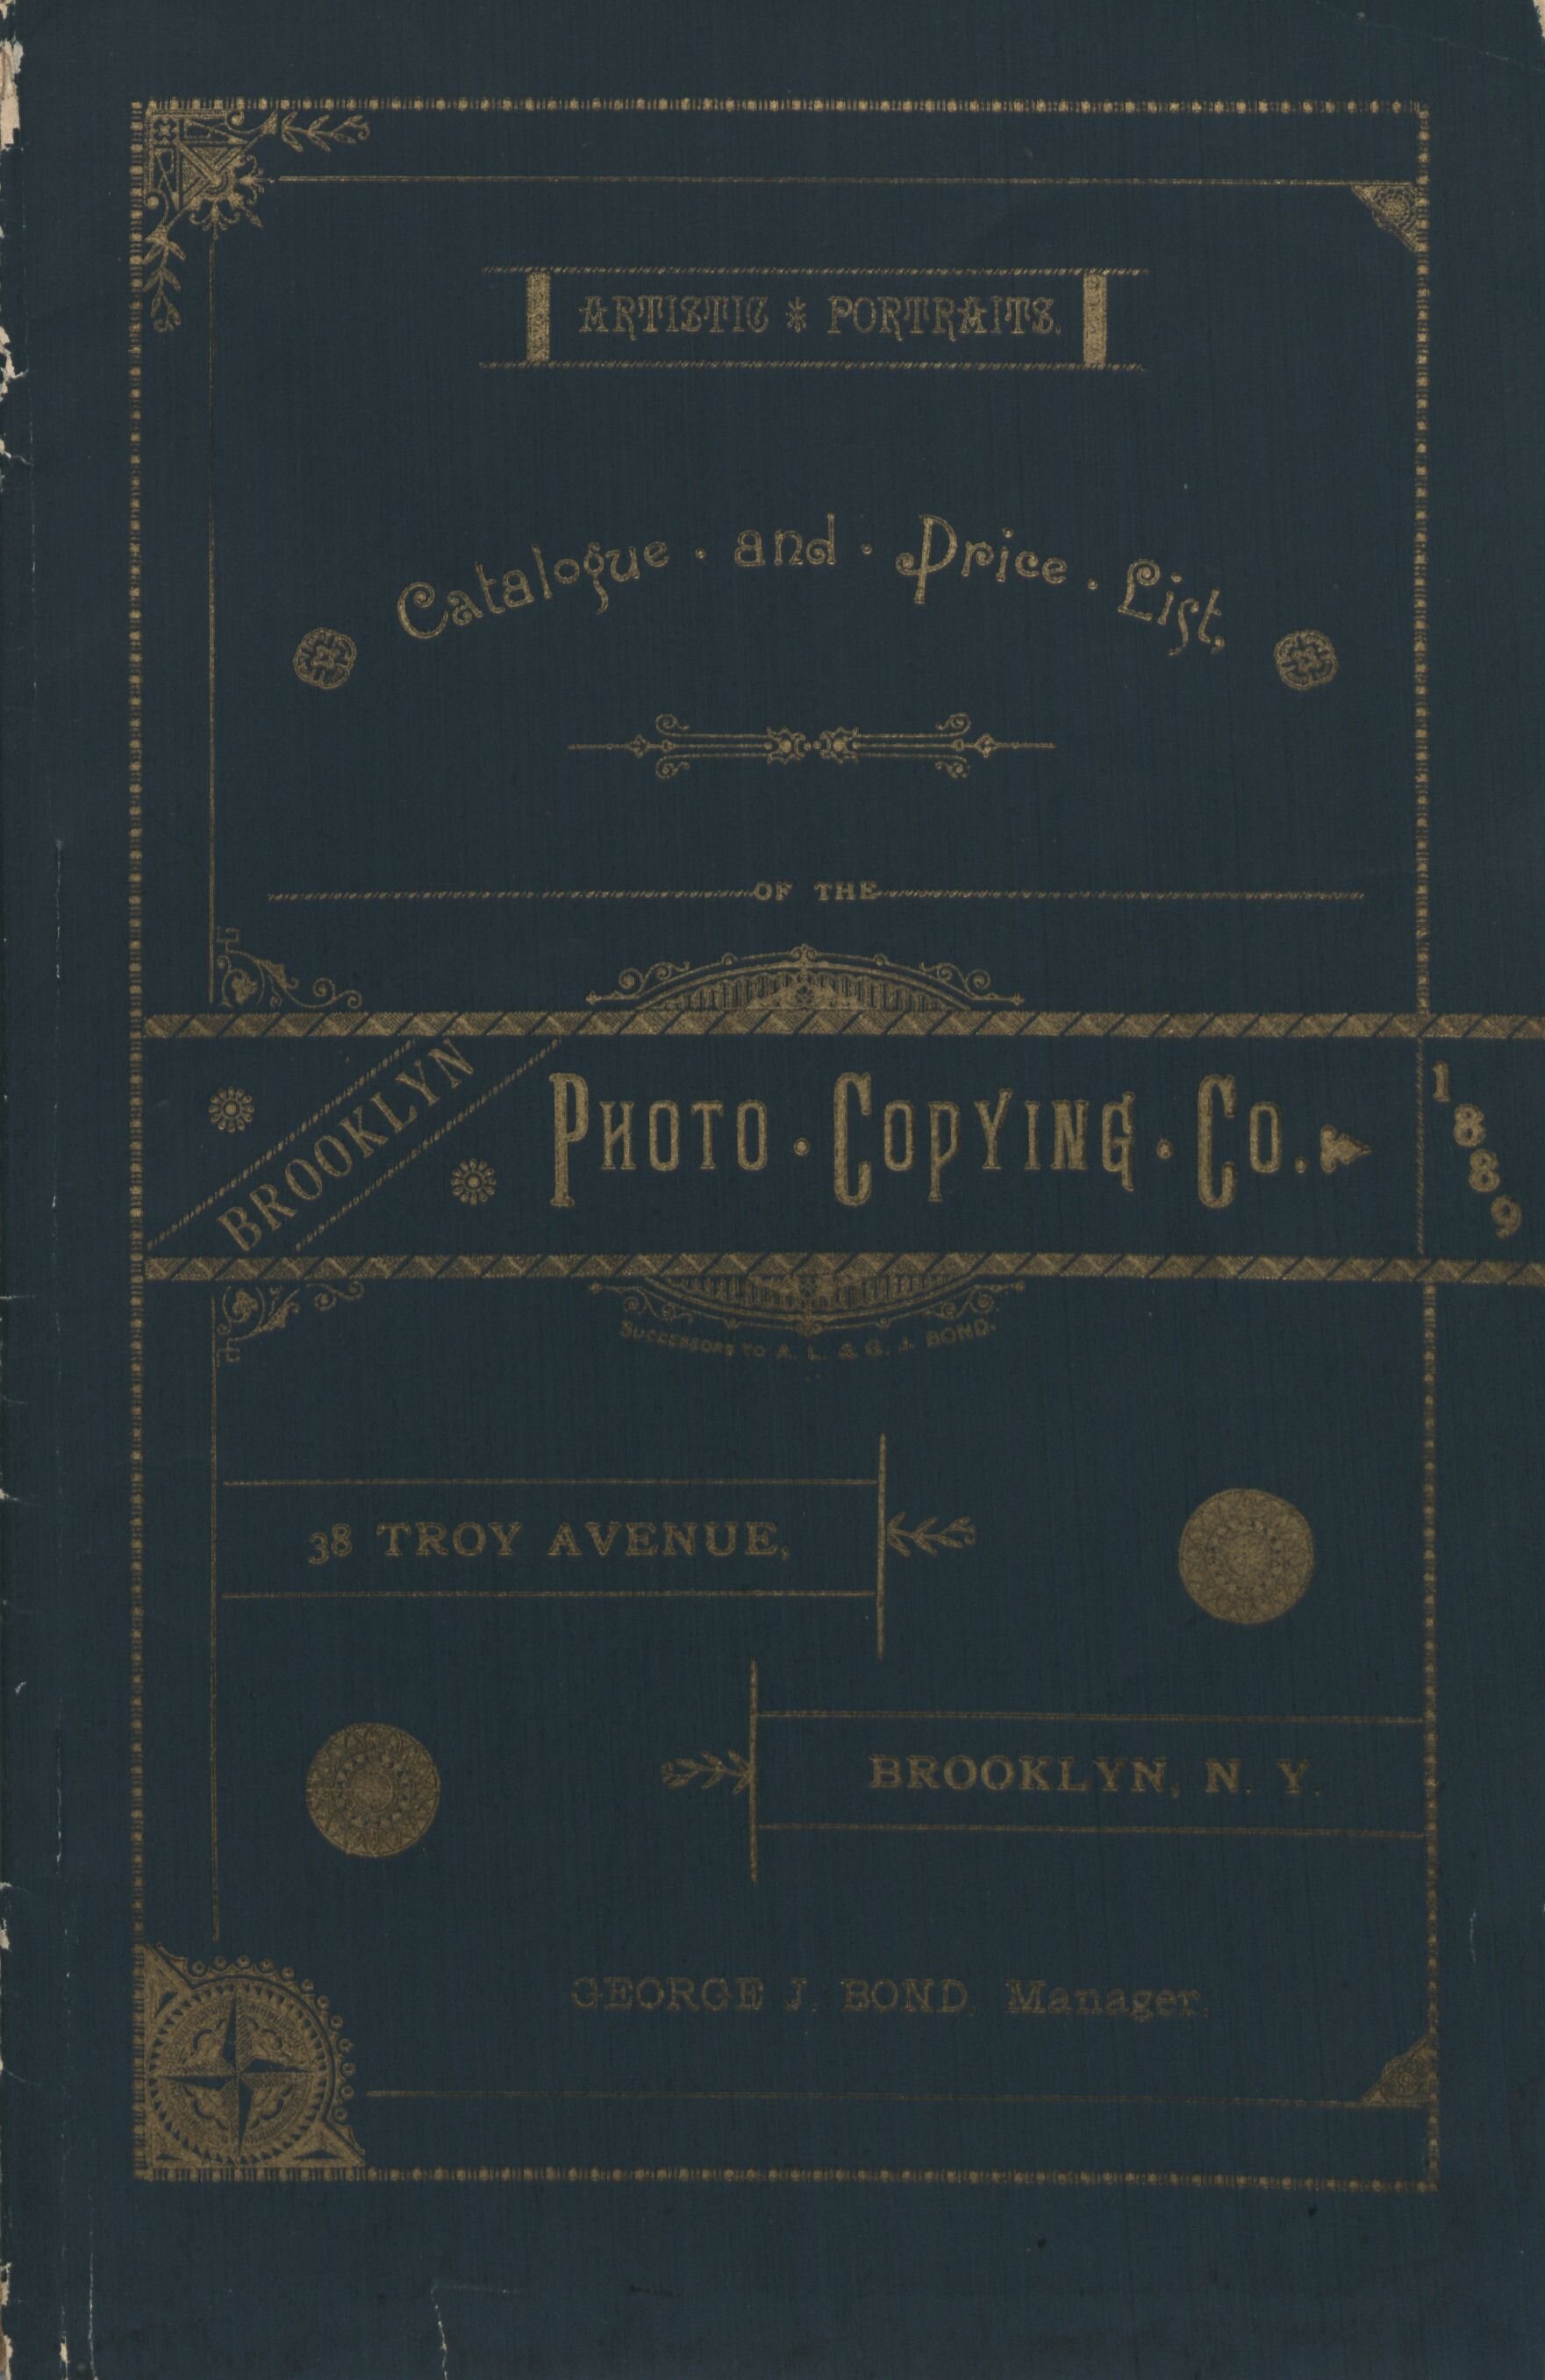     Catalogue and price list of the Brooklyn Photo Copying Co., no. 38 Troy Avenue..     (Brooklyn: Brooklyn Photo Copying, 1889).  